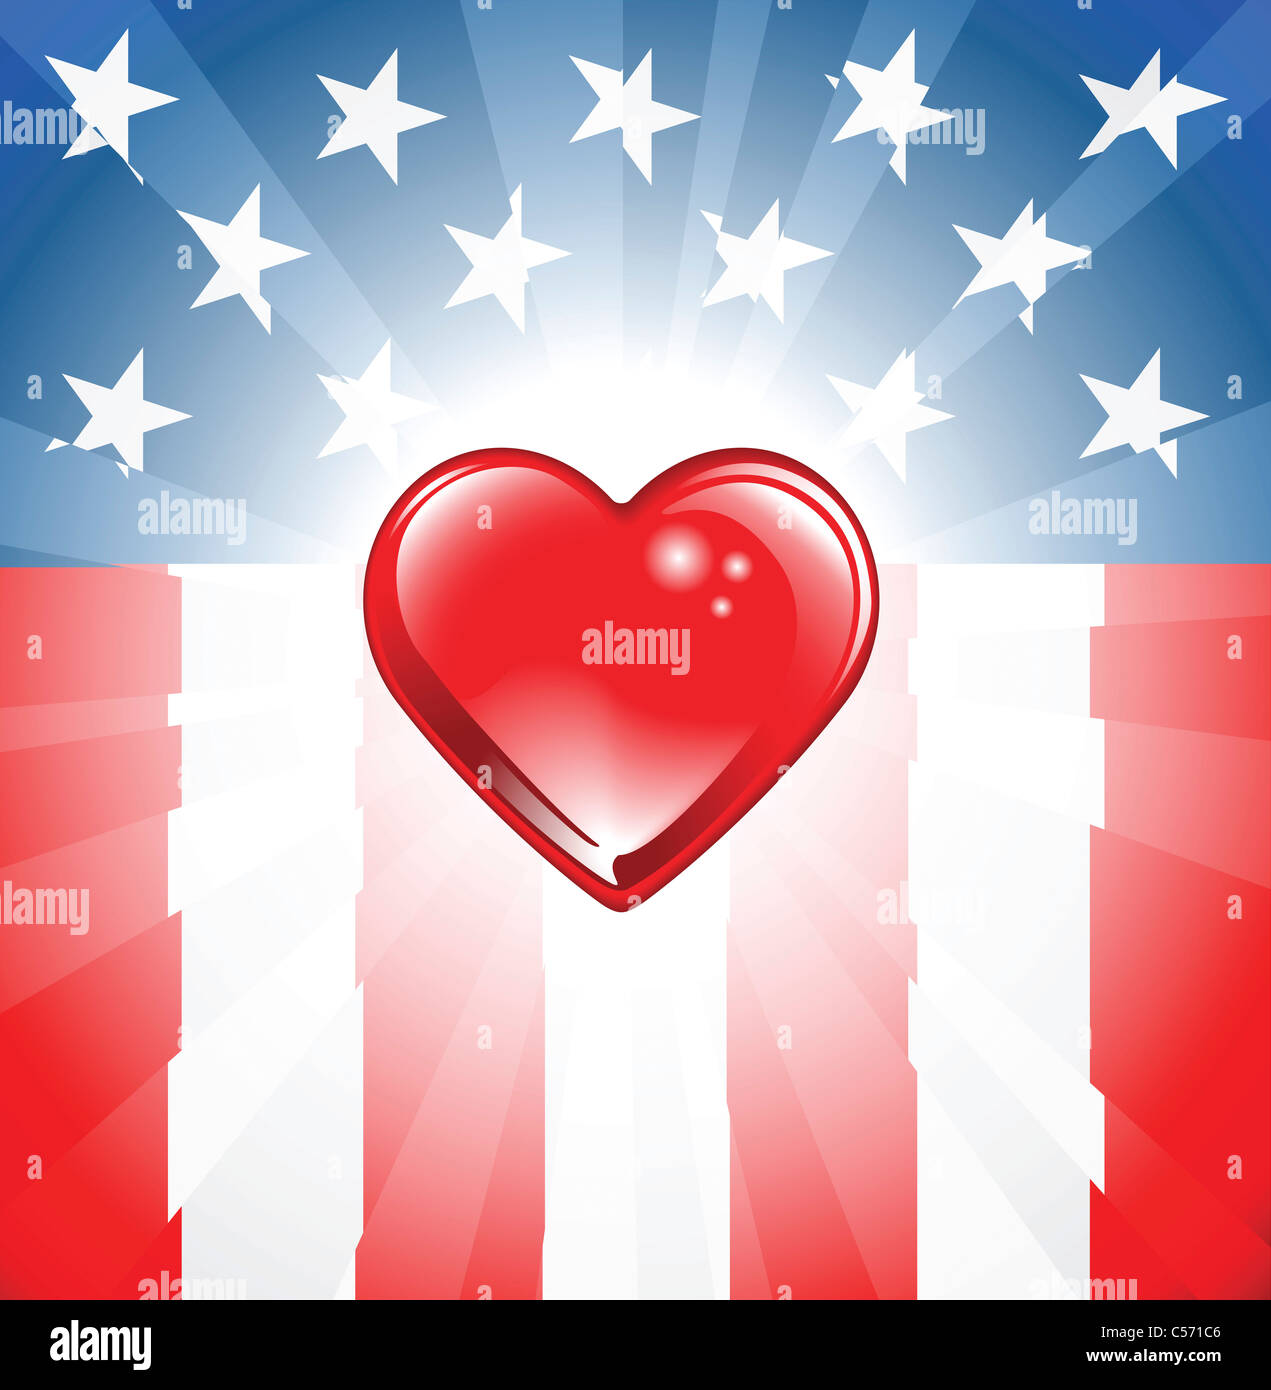 A background featuring Heart shape and stars and stripes background Stock Photo